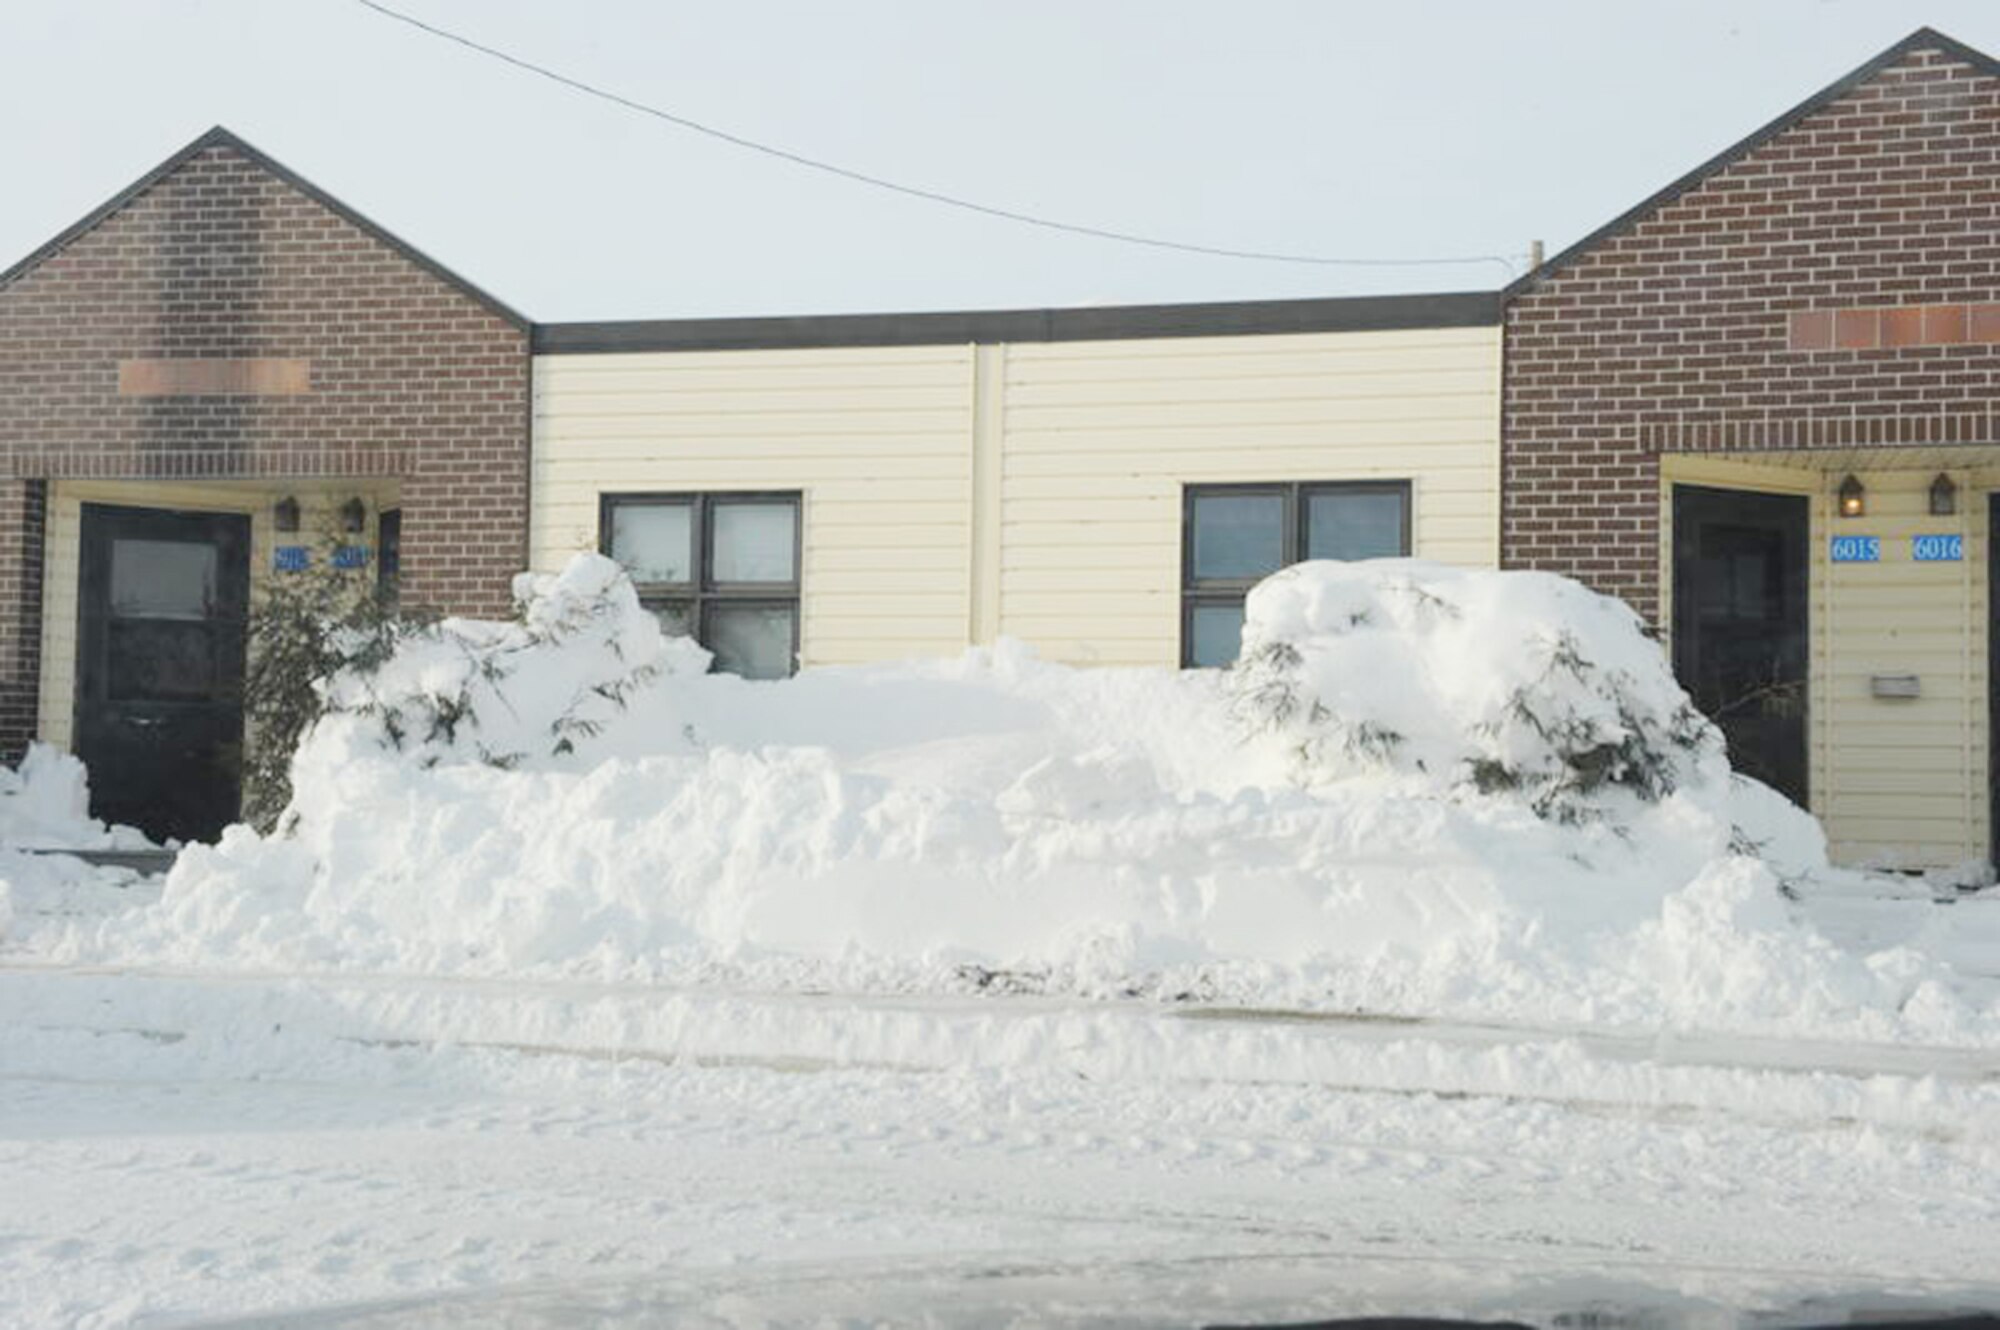 Snow piled up in front of the temporary lodging facility Dec. 29, 2009 at Minot Air Force Base, N.D. A Christmas weekend blizzard resulted in 25.7 inches of snow. (U.S. Air Force photo/Staff Sgt. Stacy Moless)